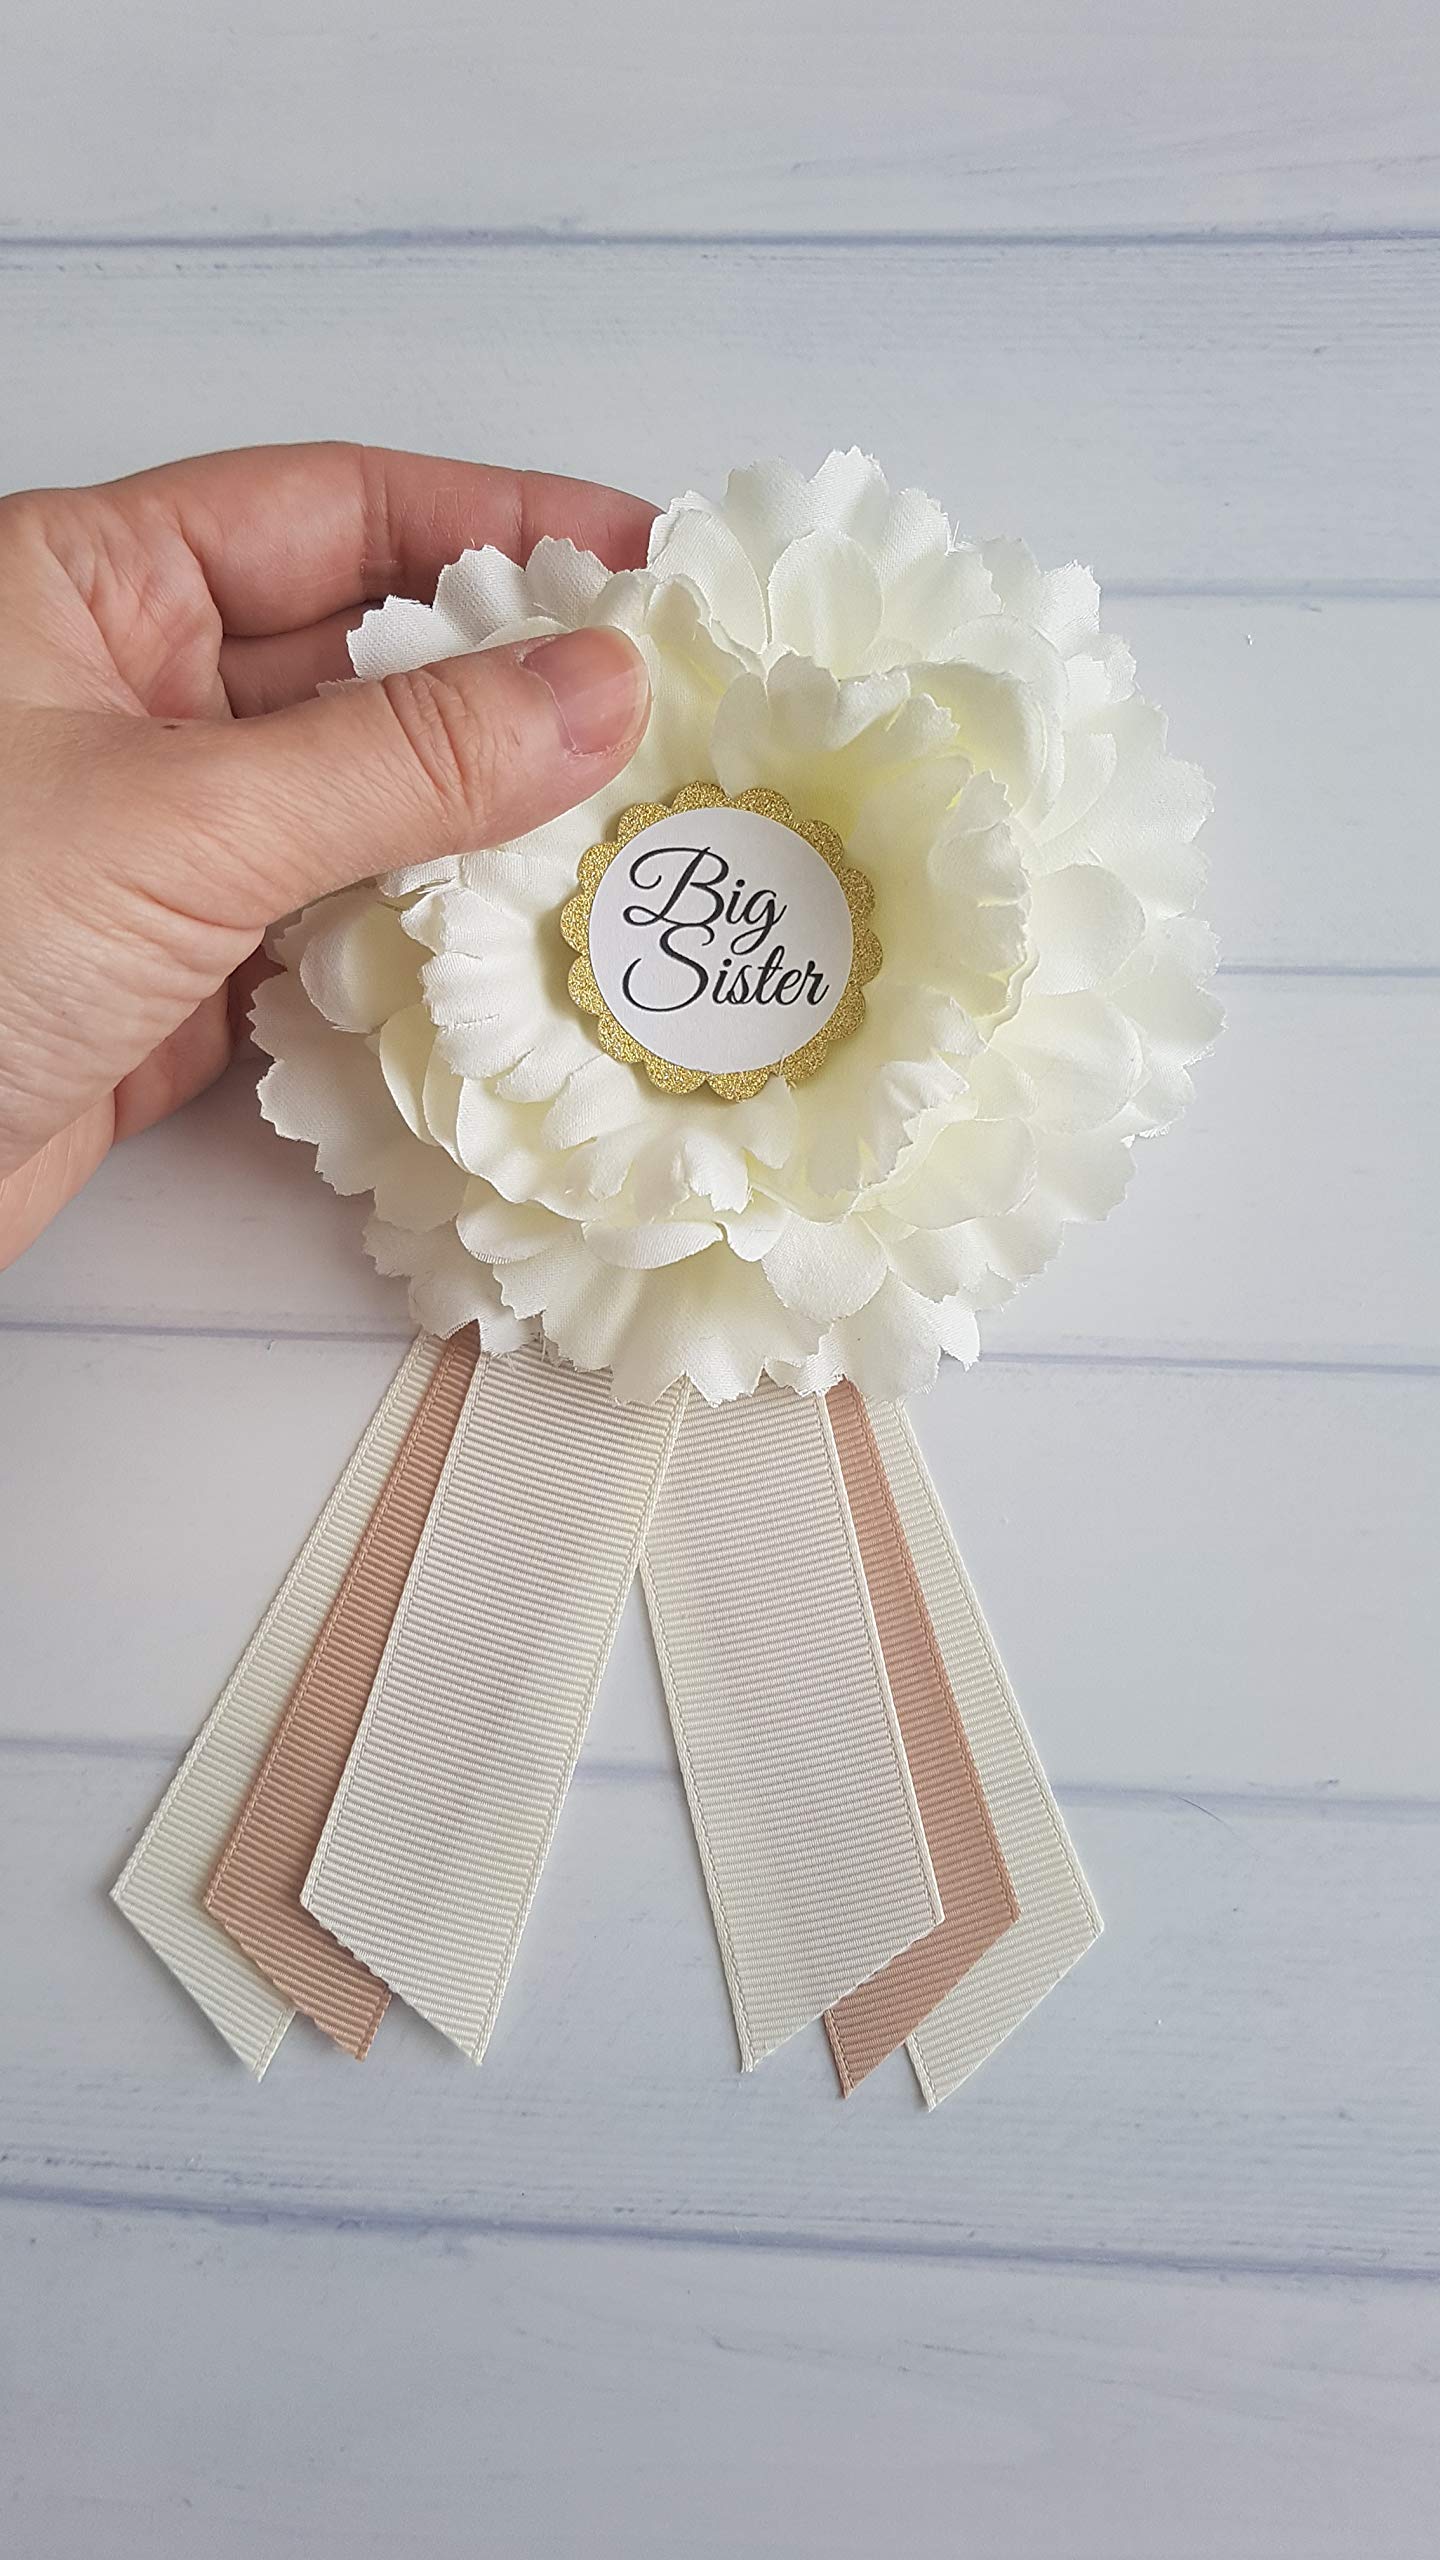 Mom To Be Sash and Dad To Be Pin By LMC | Baby Shower Belly Sash and Corsage | USA Handmade | Heat Sealed Ends | Ivory and Beige (Big Sister pin)